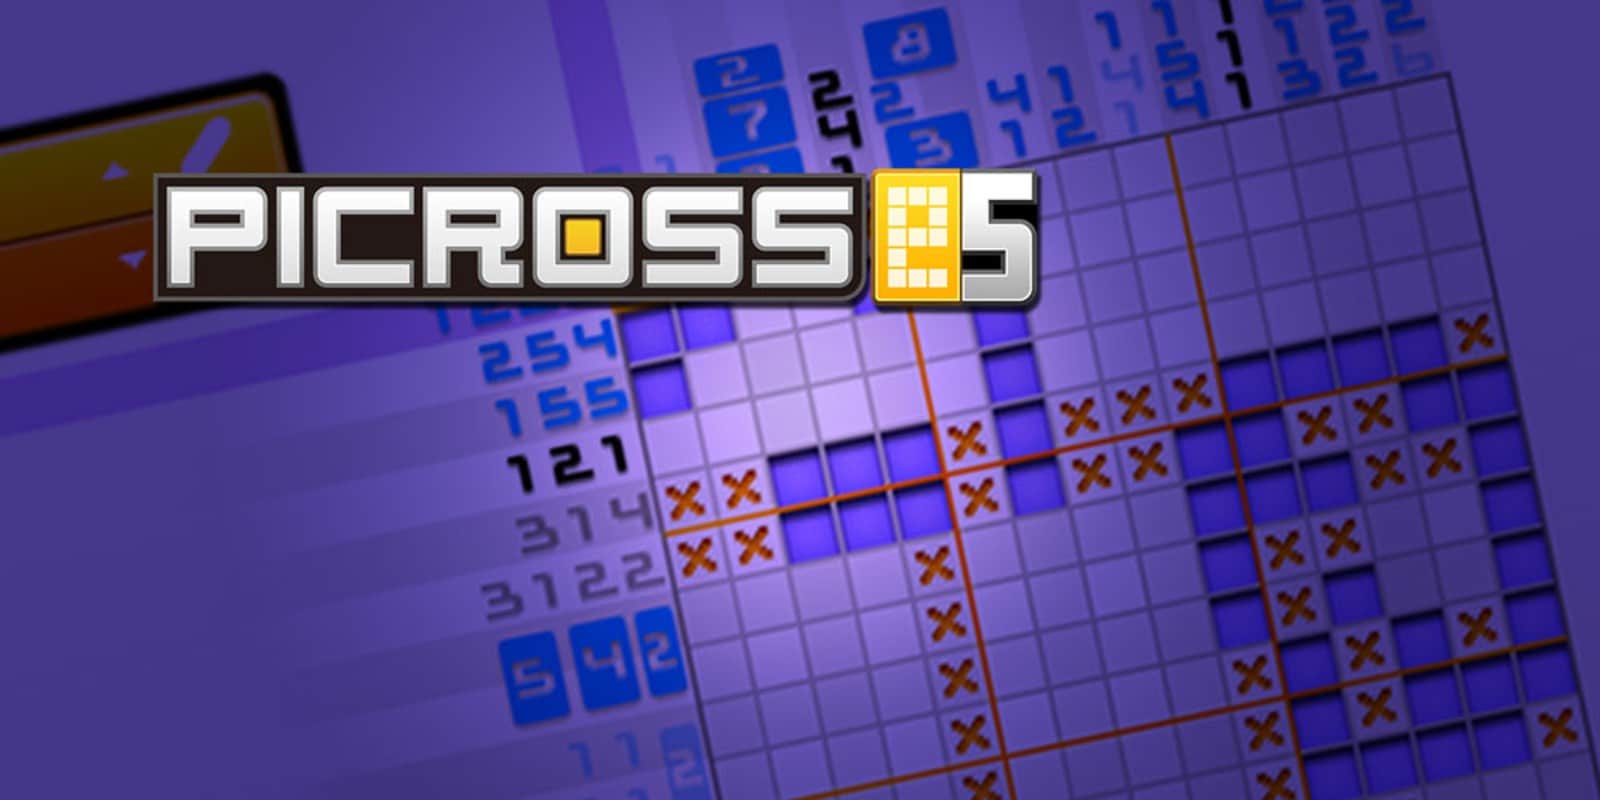 Picross e5 player count stats